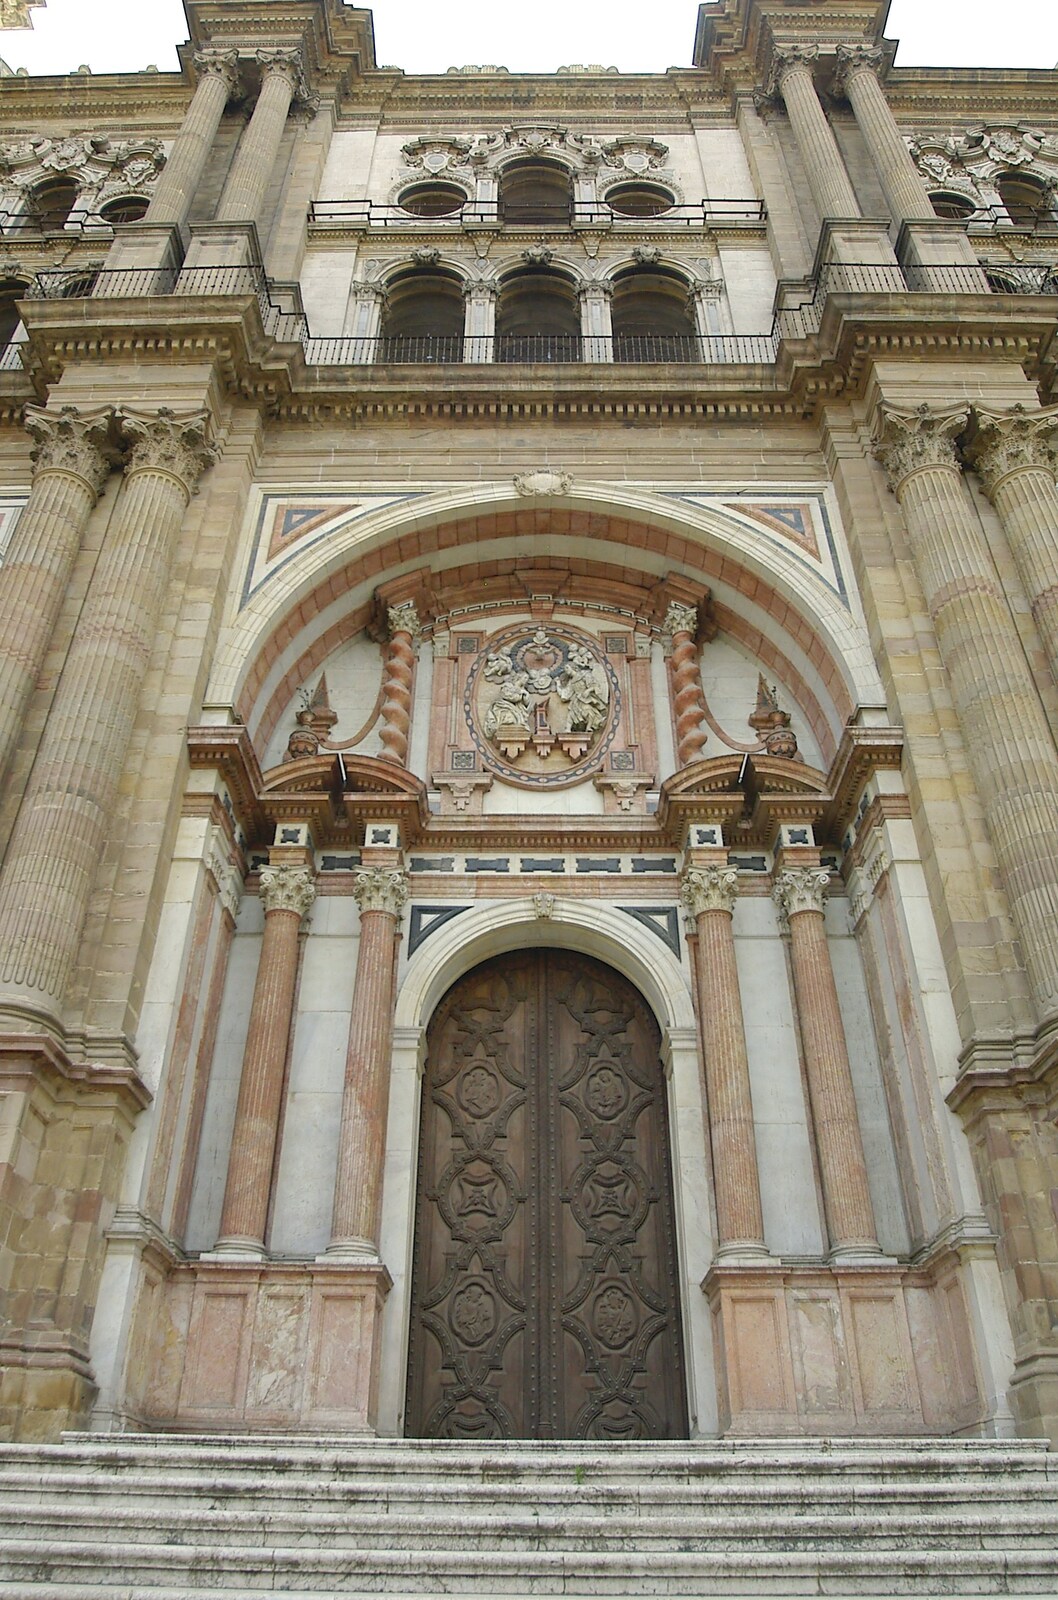 The cathedral's main door from Working at Telefónica, Malaga, Spain - 6th June 2006